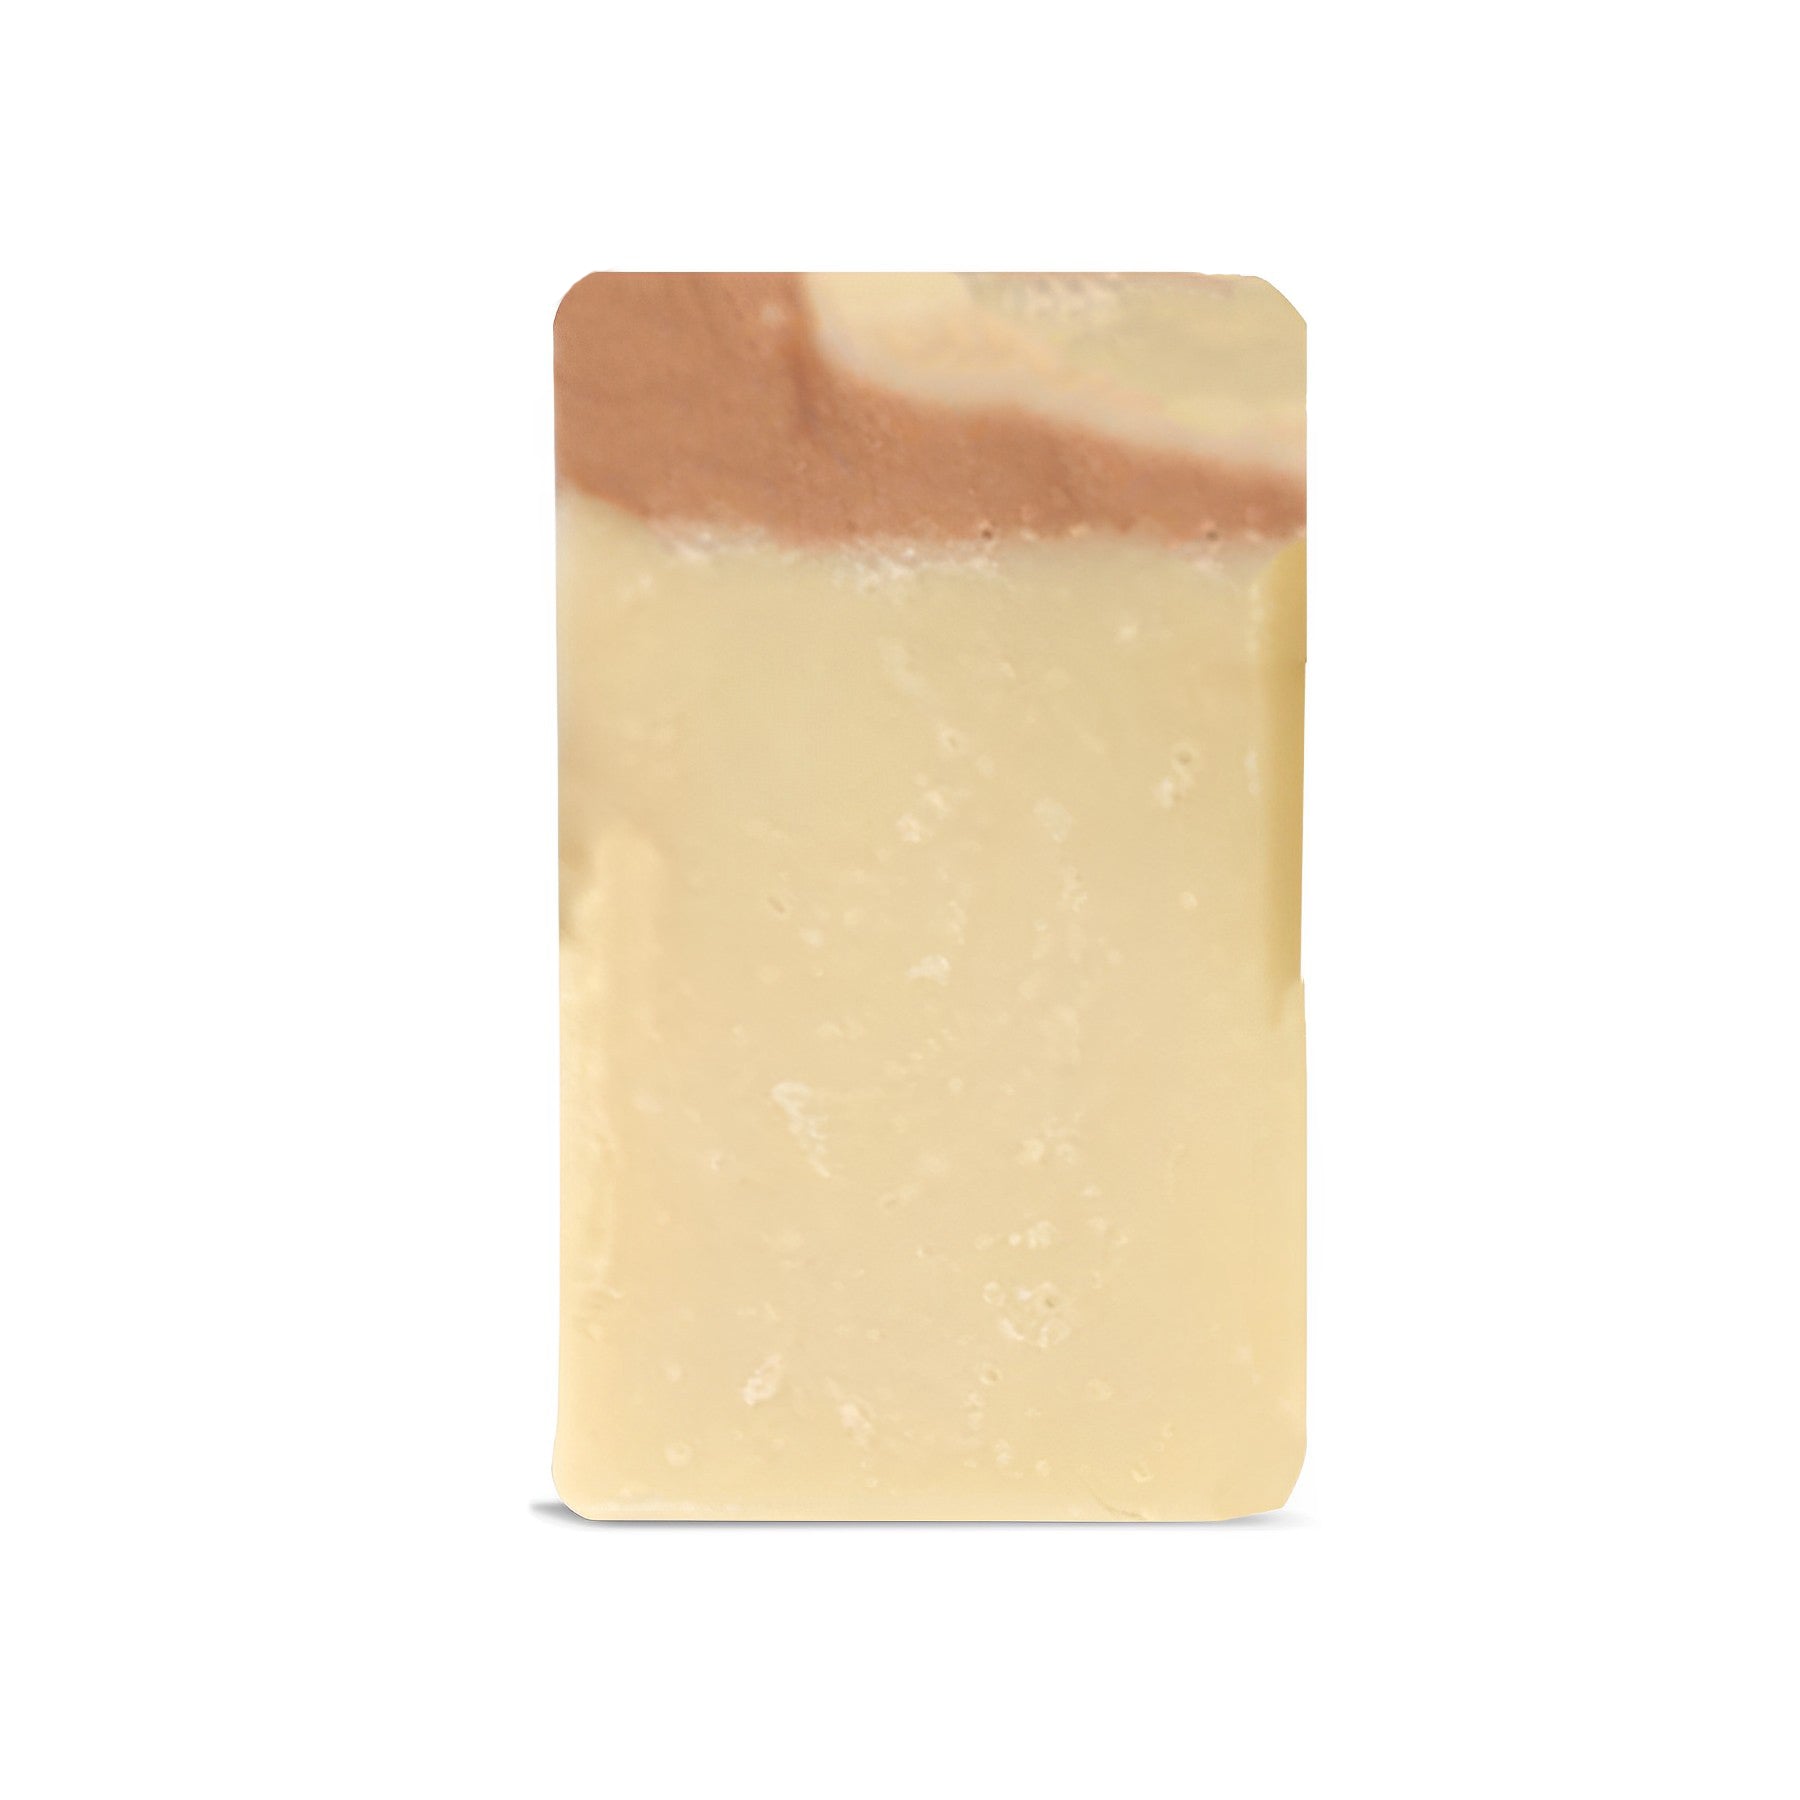 Organic Cold Pressed Pineapple Soap